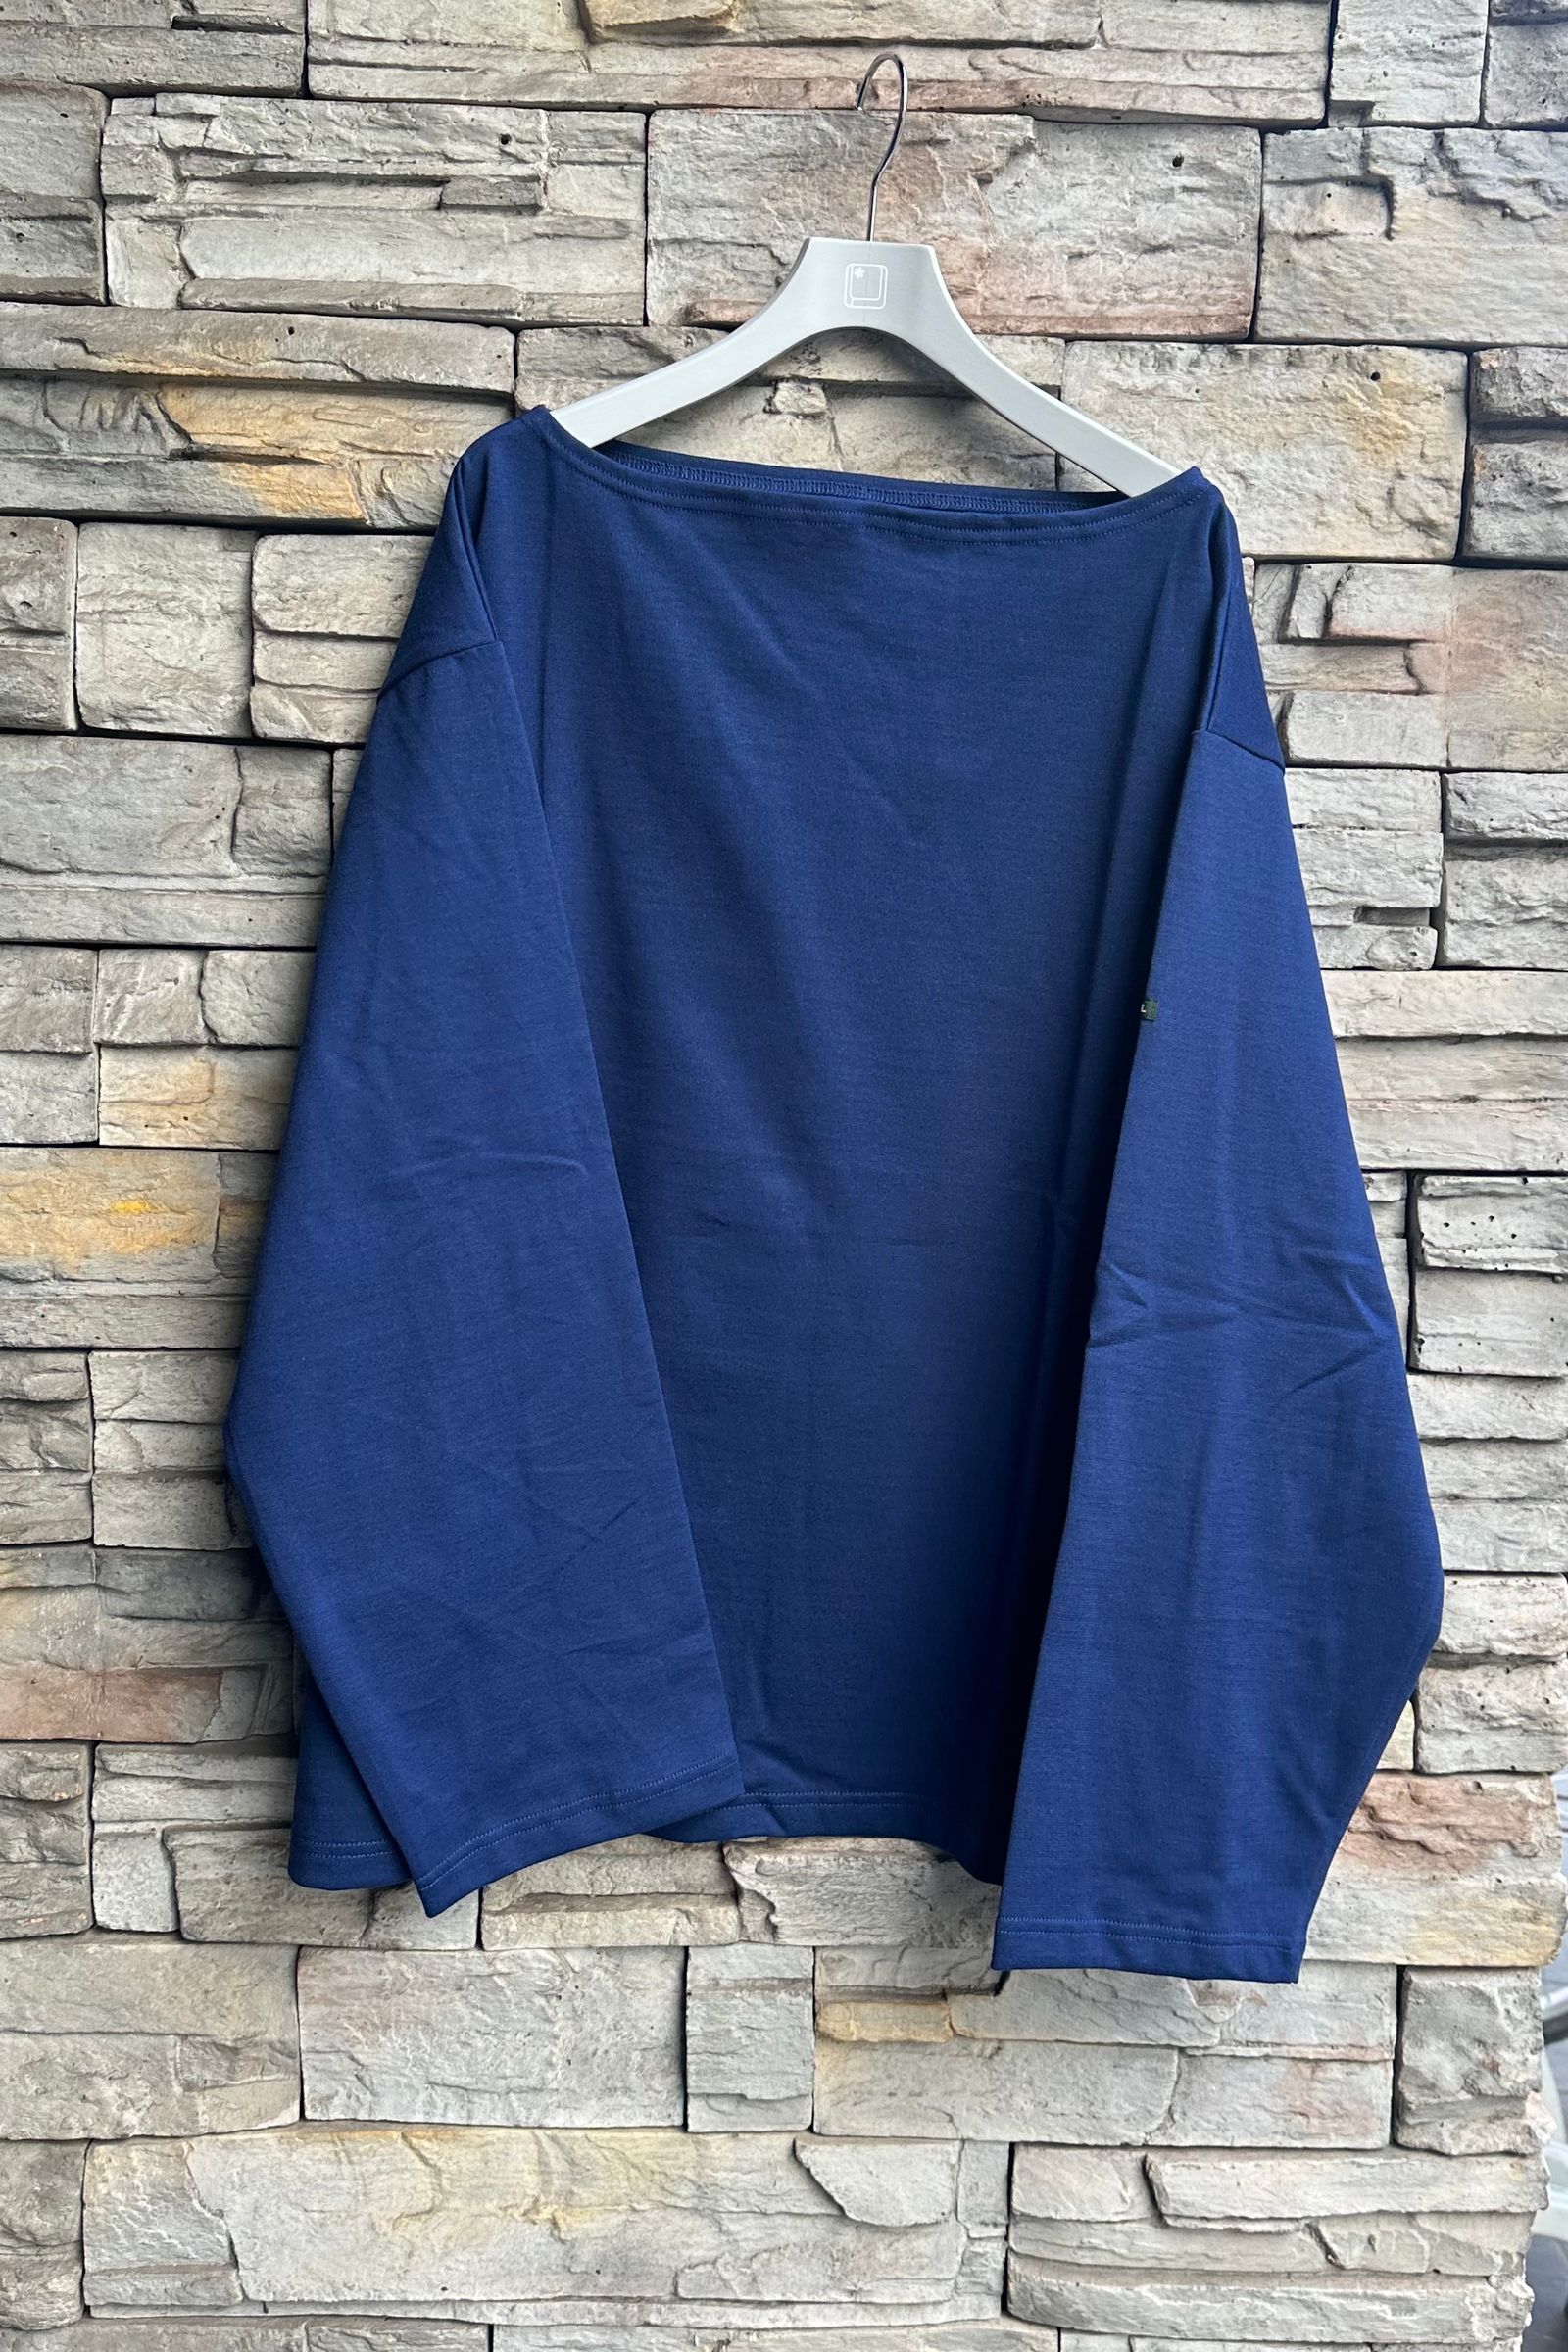 OUTIL - バスクシャツ/tricot aast -BLUE POINT- 24ss unisex | asterisk